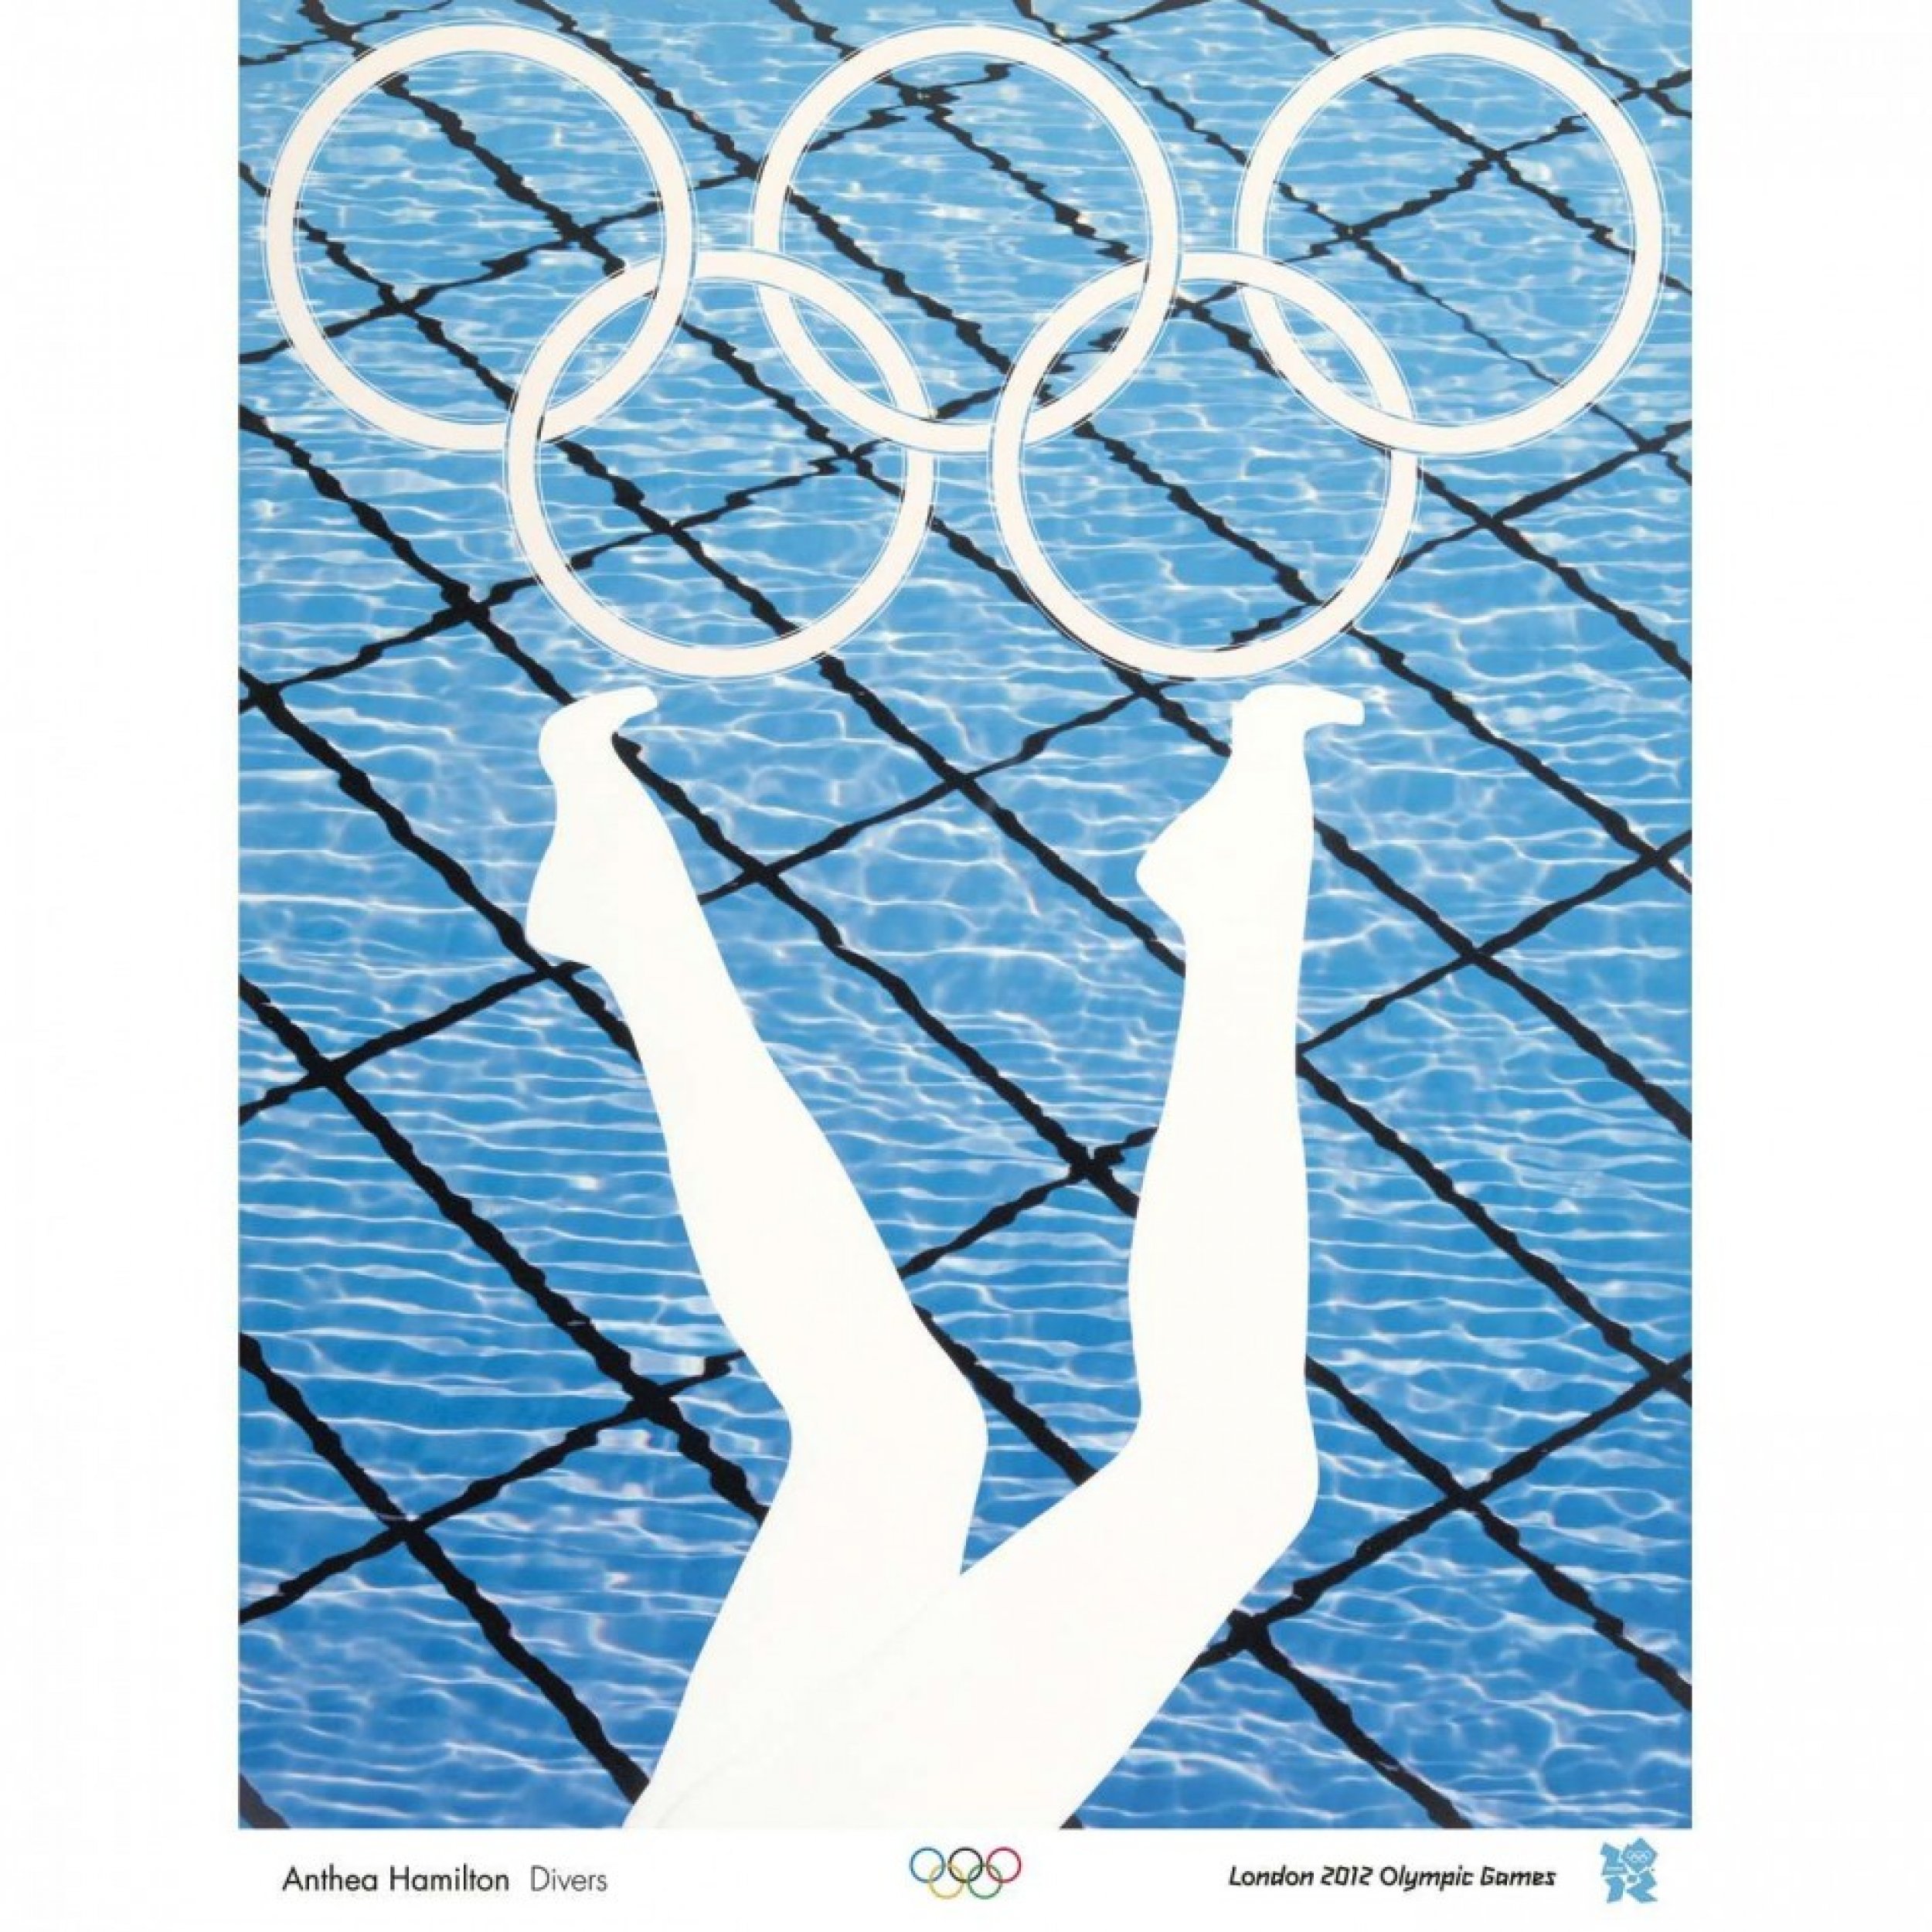 London 2012 official poster 4